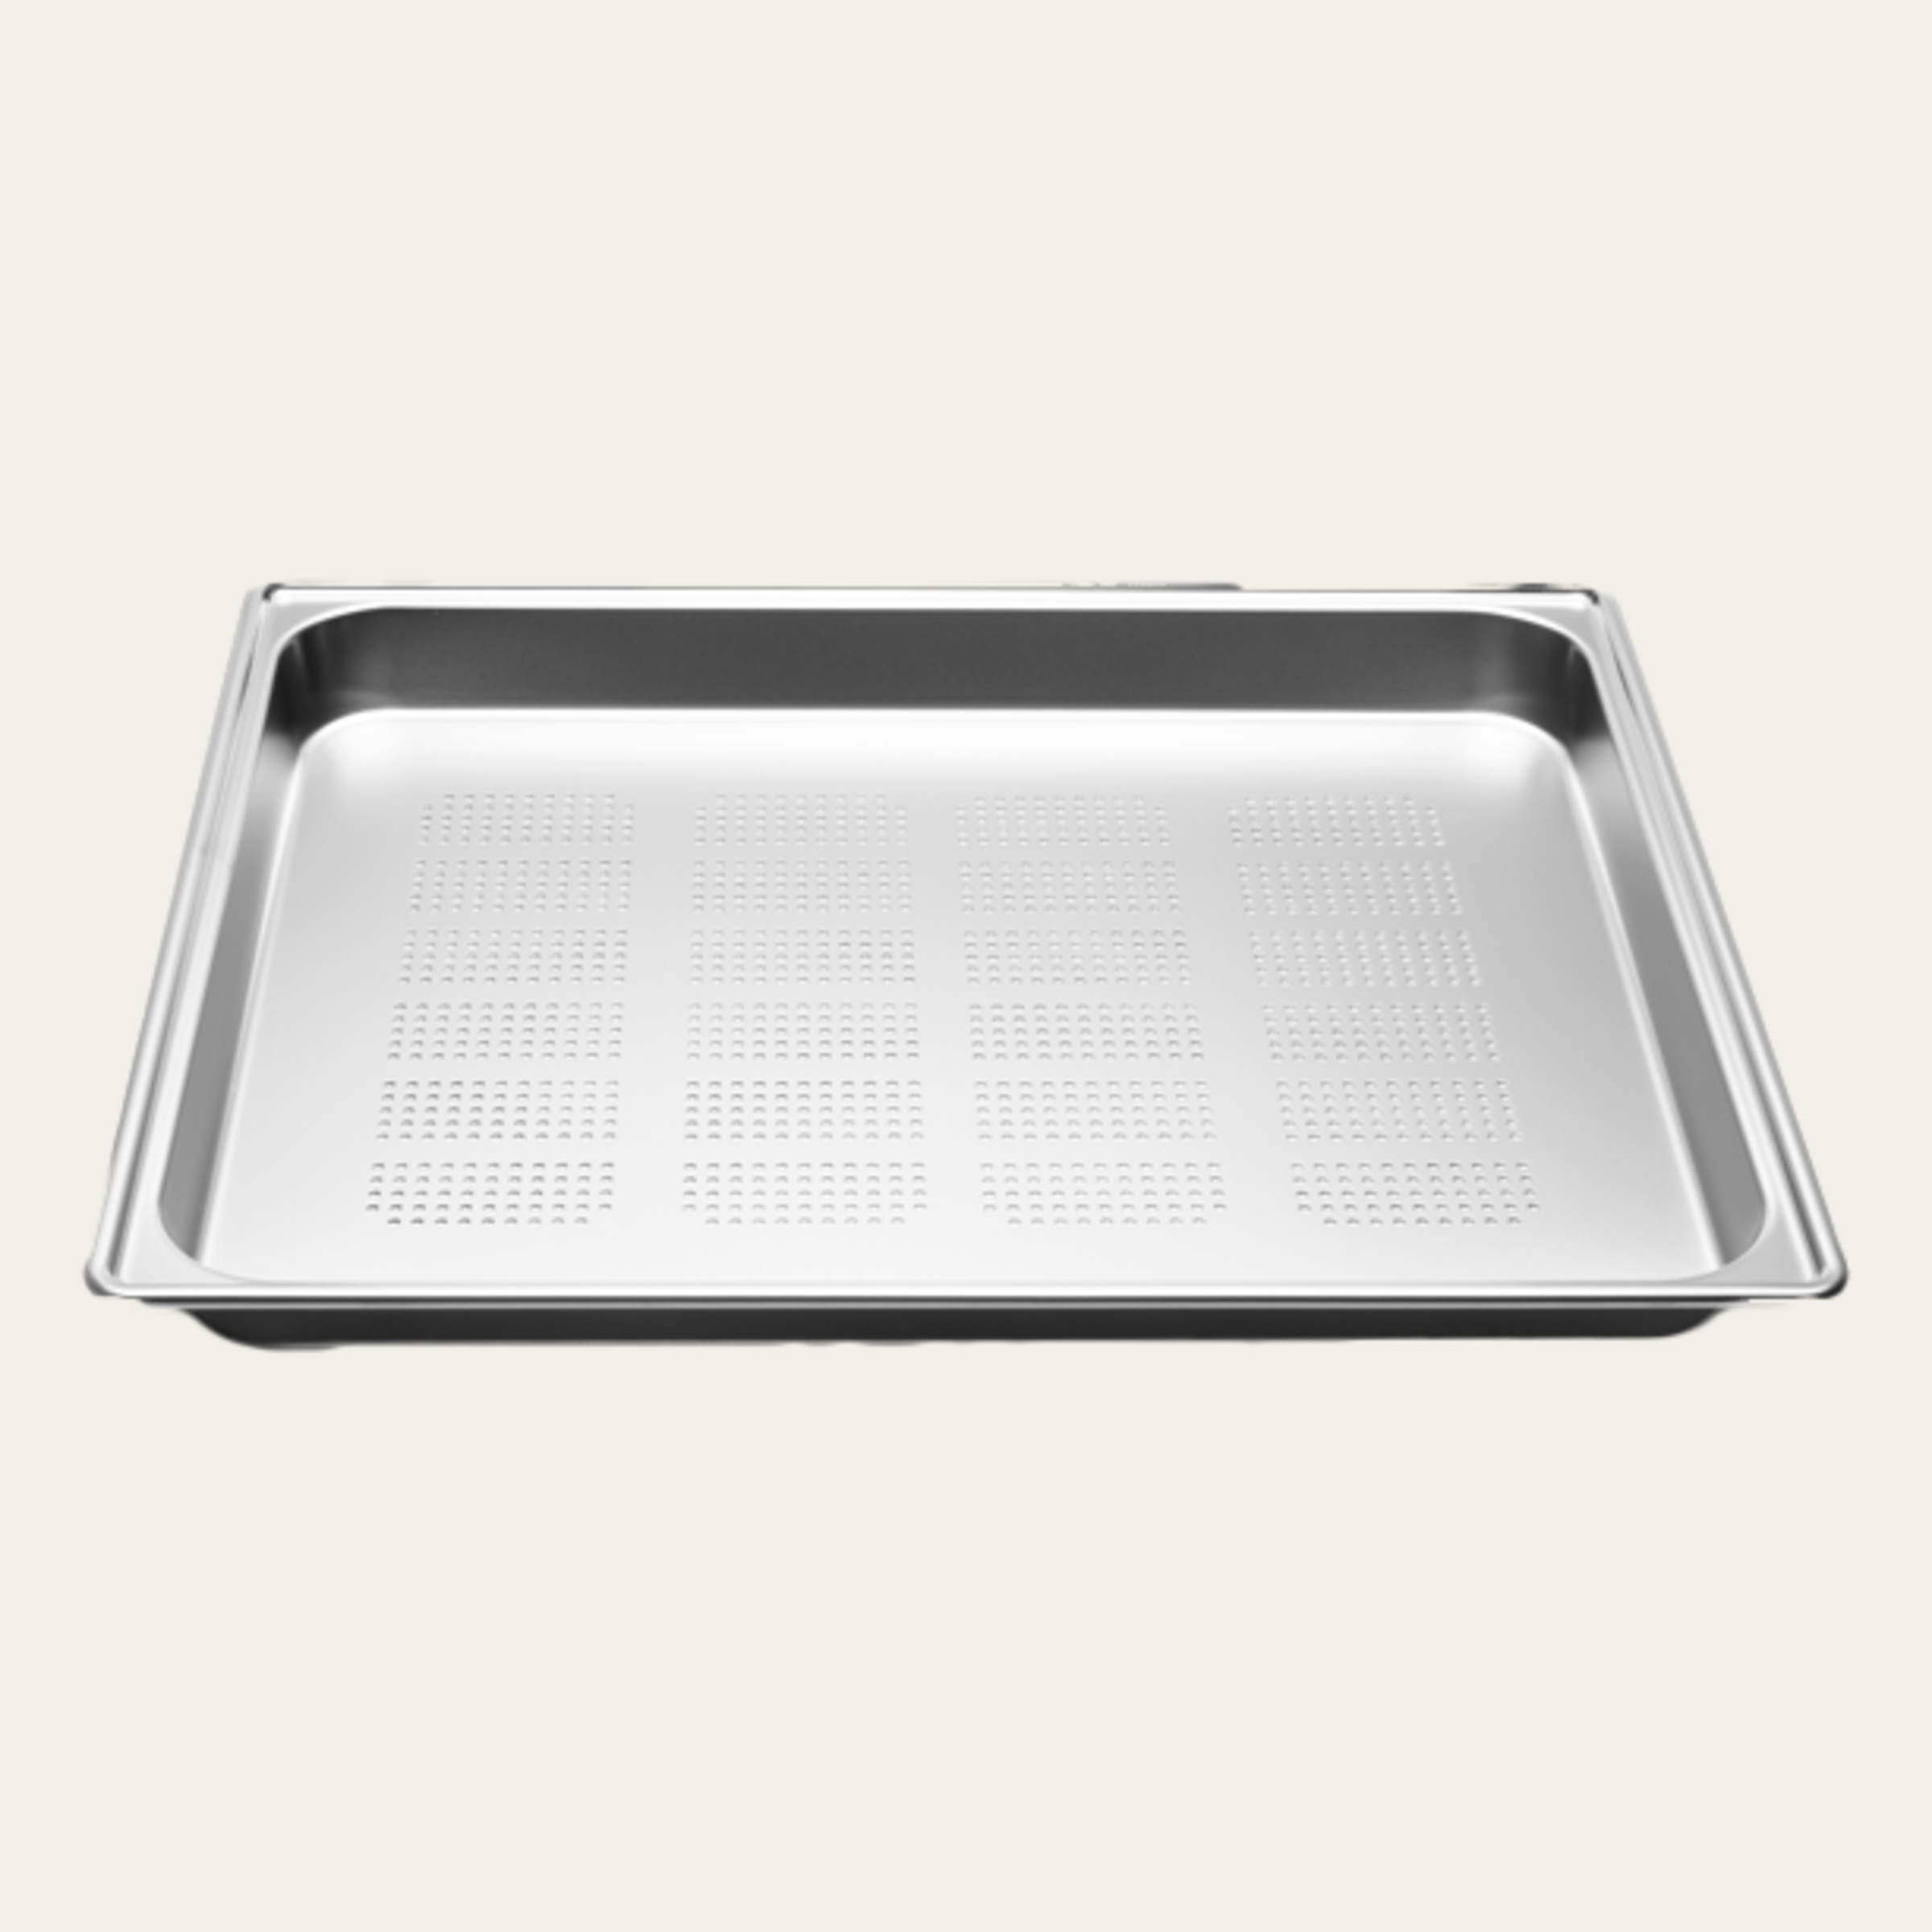 Perforated cooking tray, 430 x 370 x 25mm